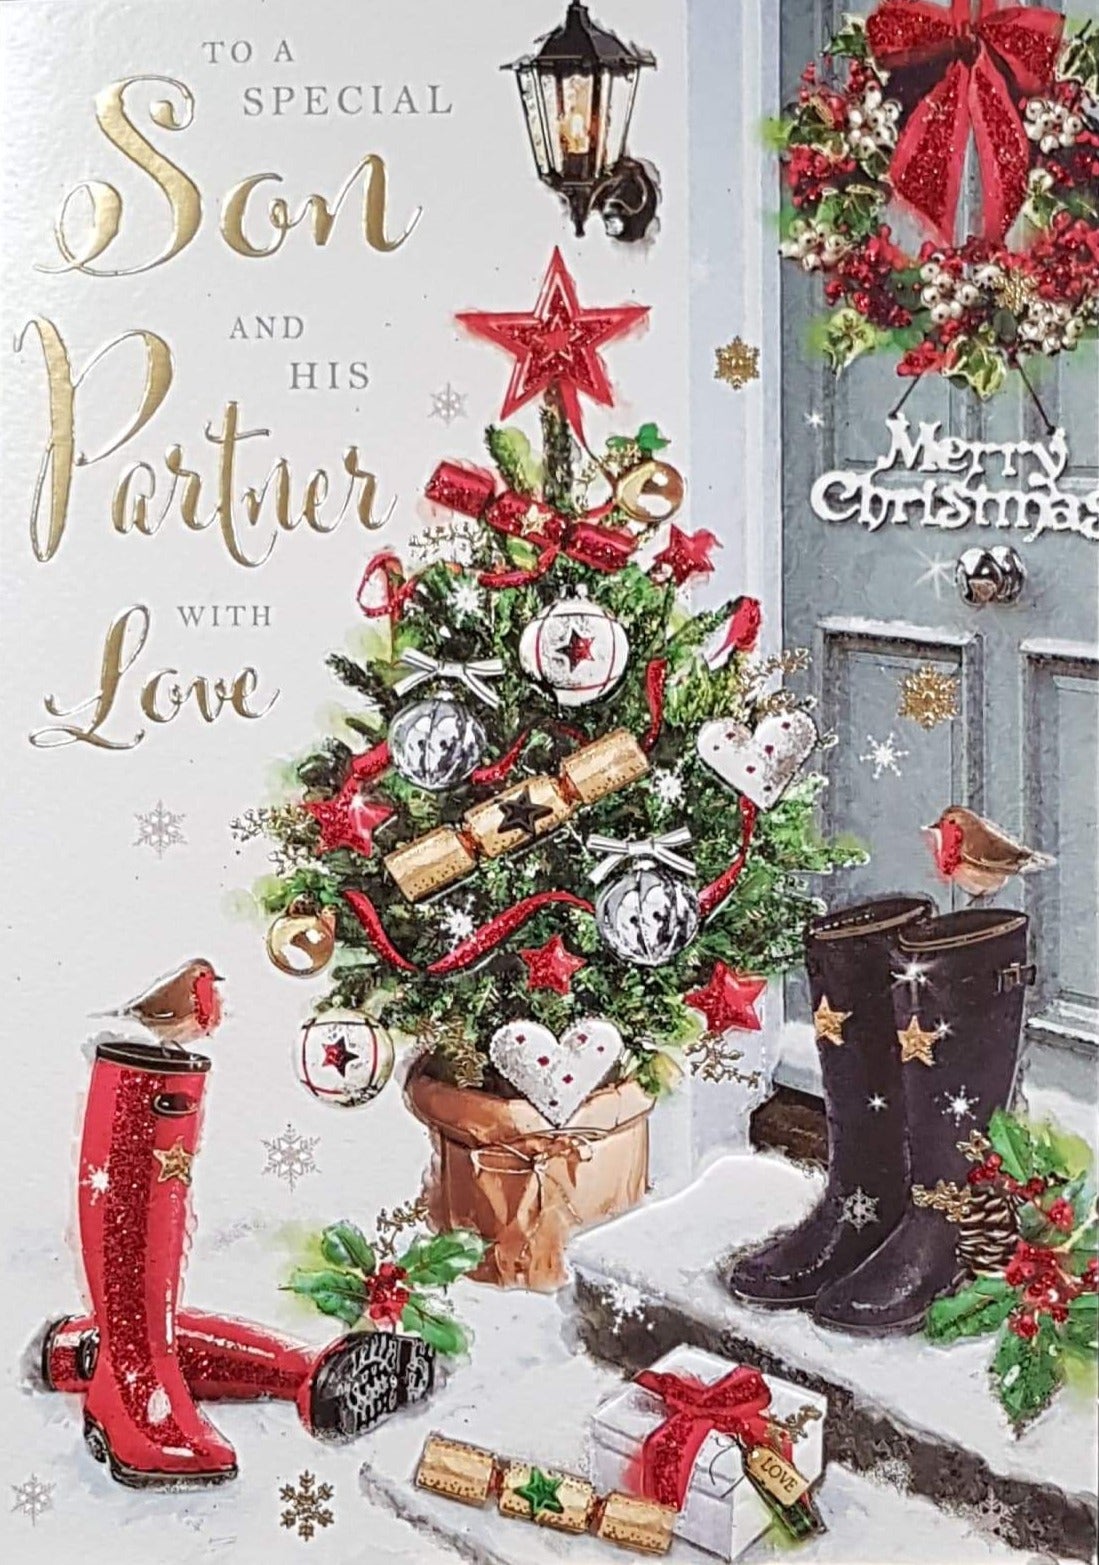 Son And His Partner Christmas Card - With Love & Christmas Tree & Boots at Front Door